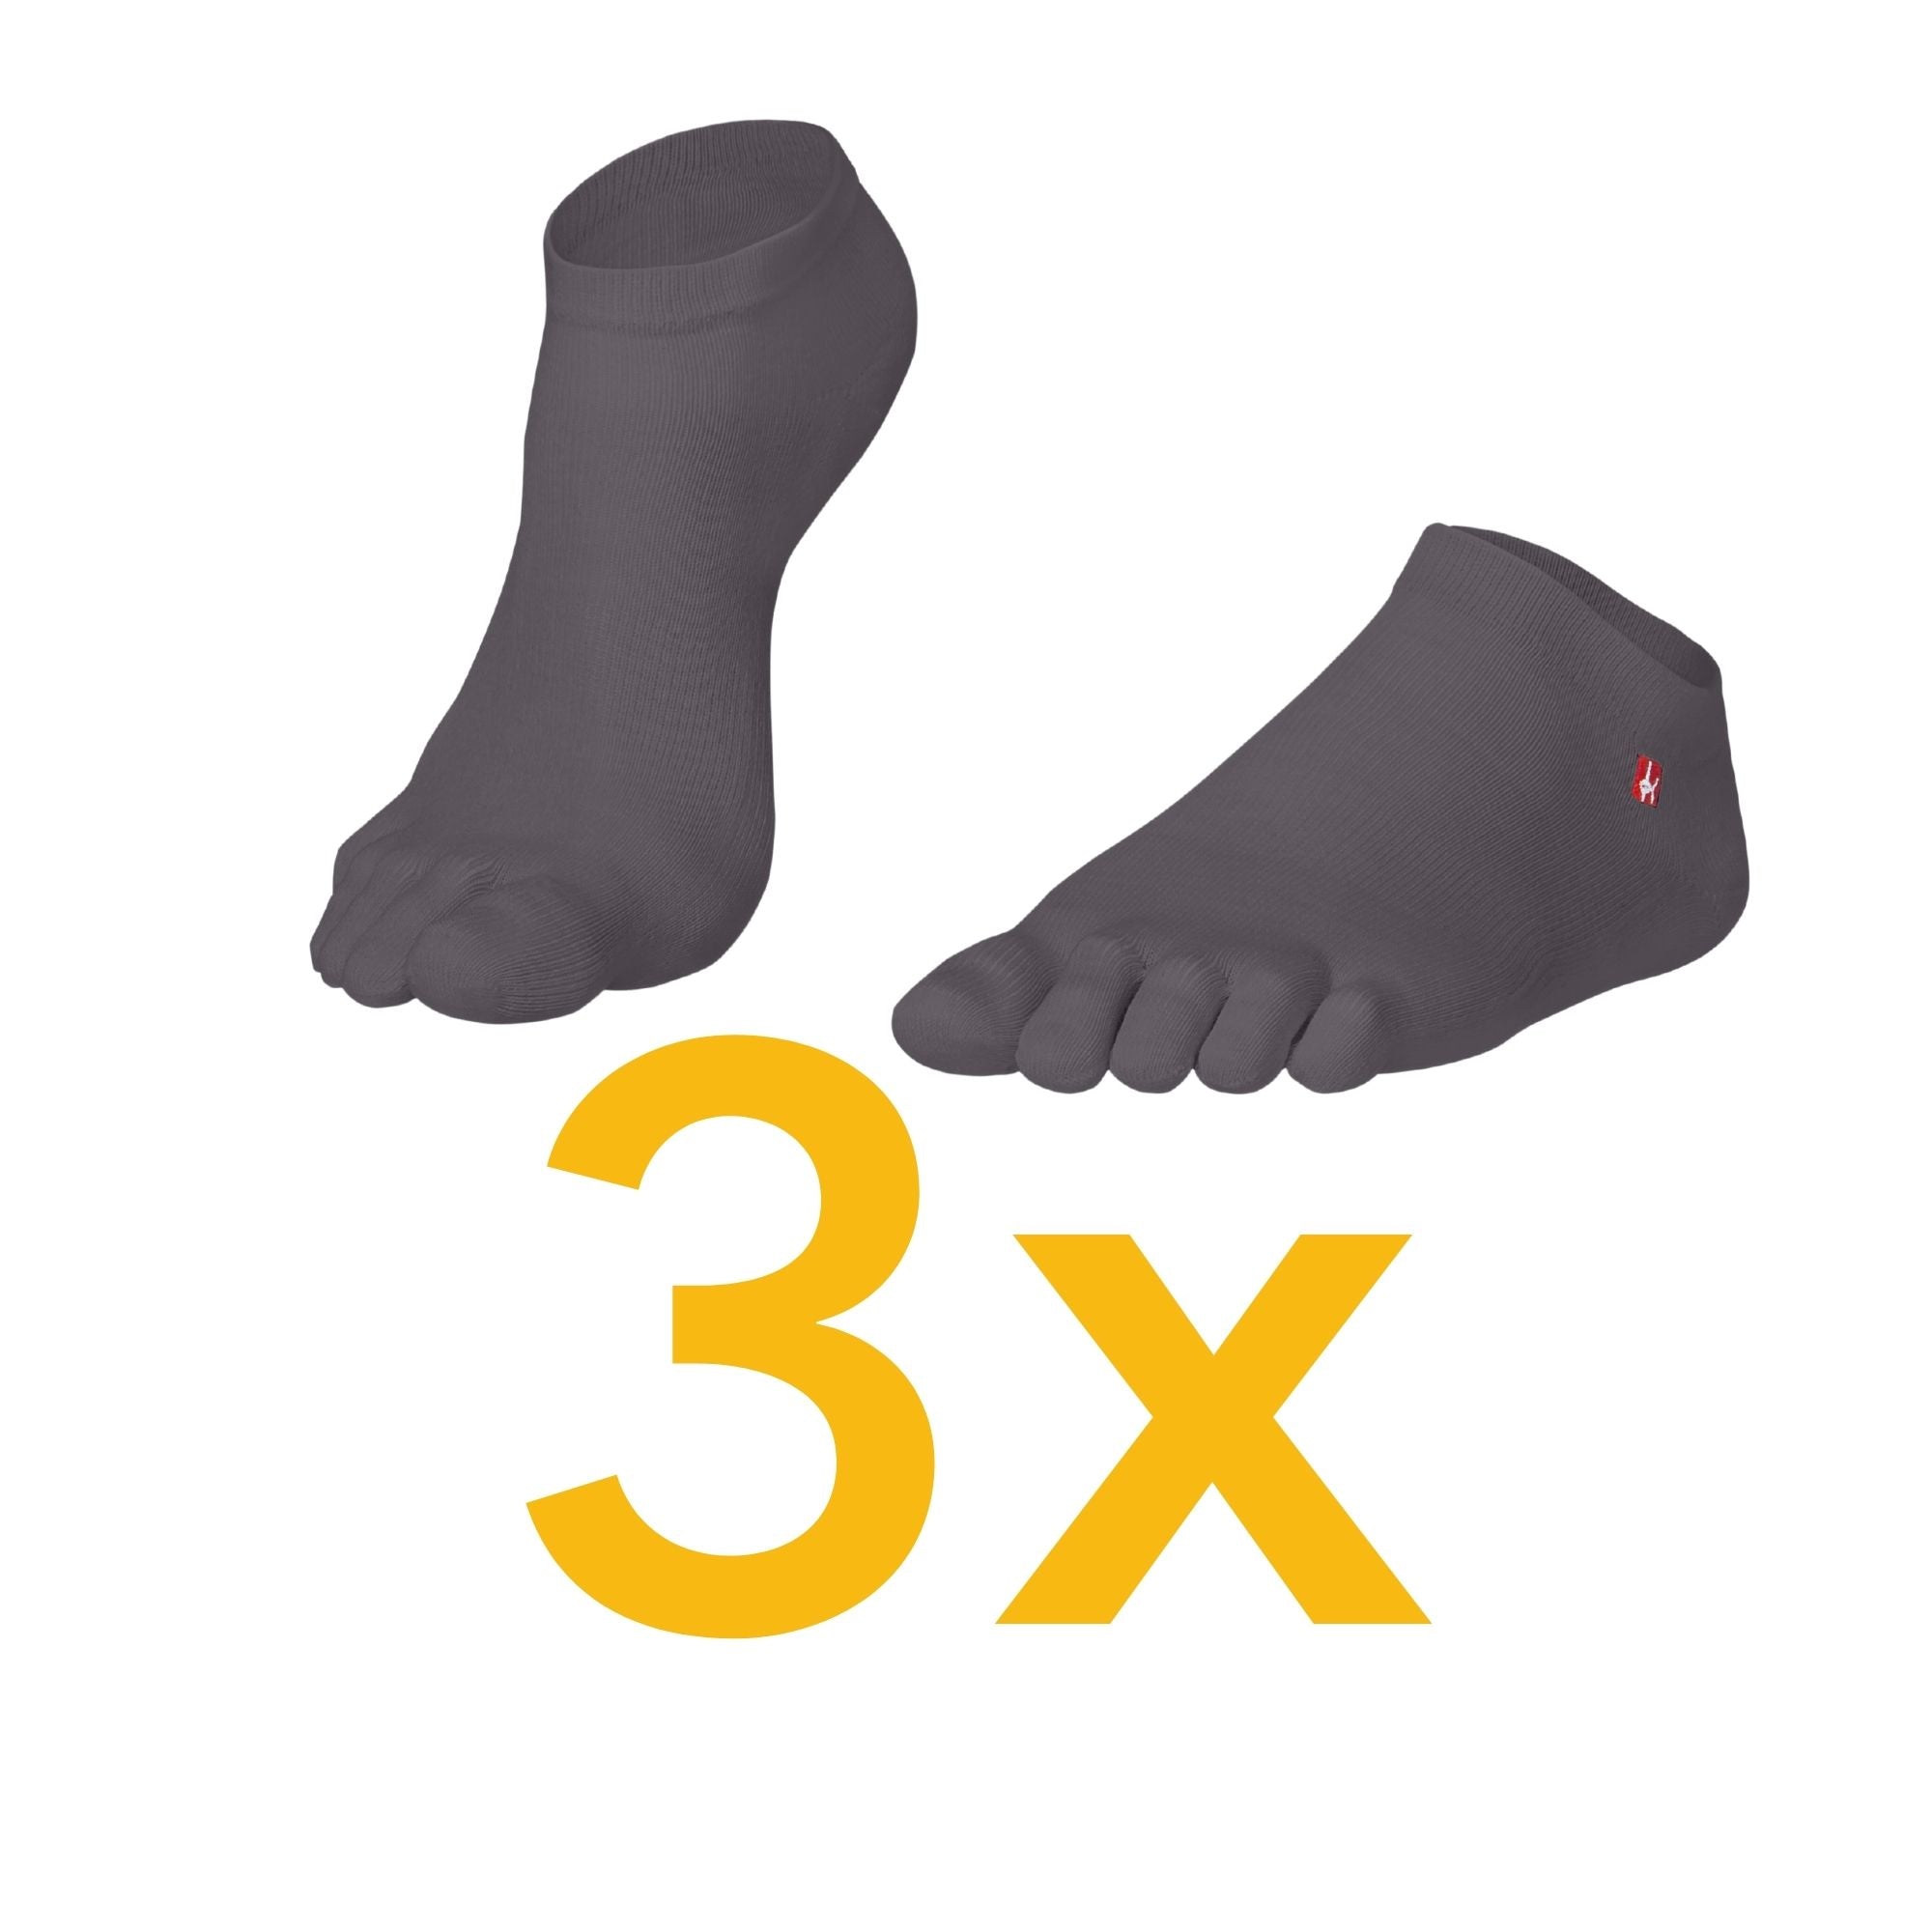 3-pack sports toe socks from Coolmax and cotton from Knitido in gray